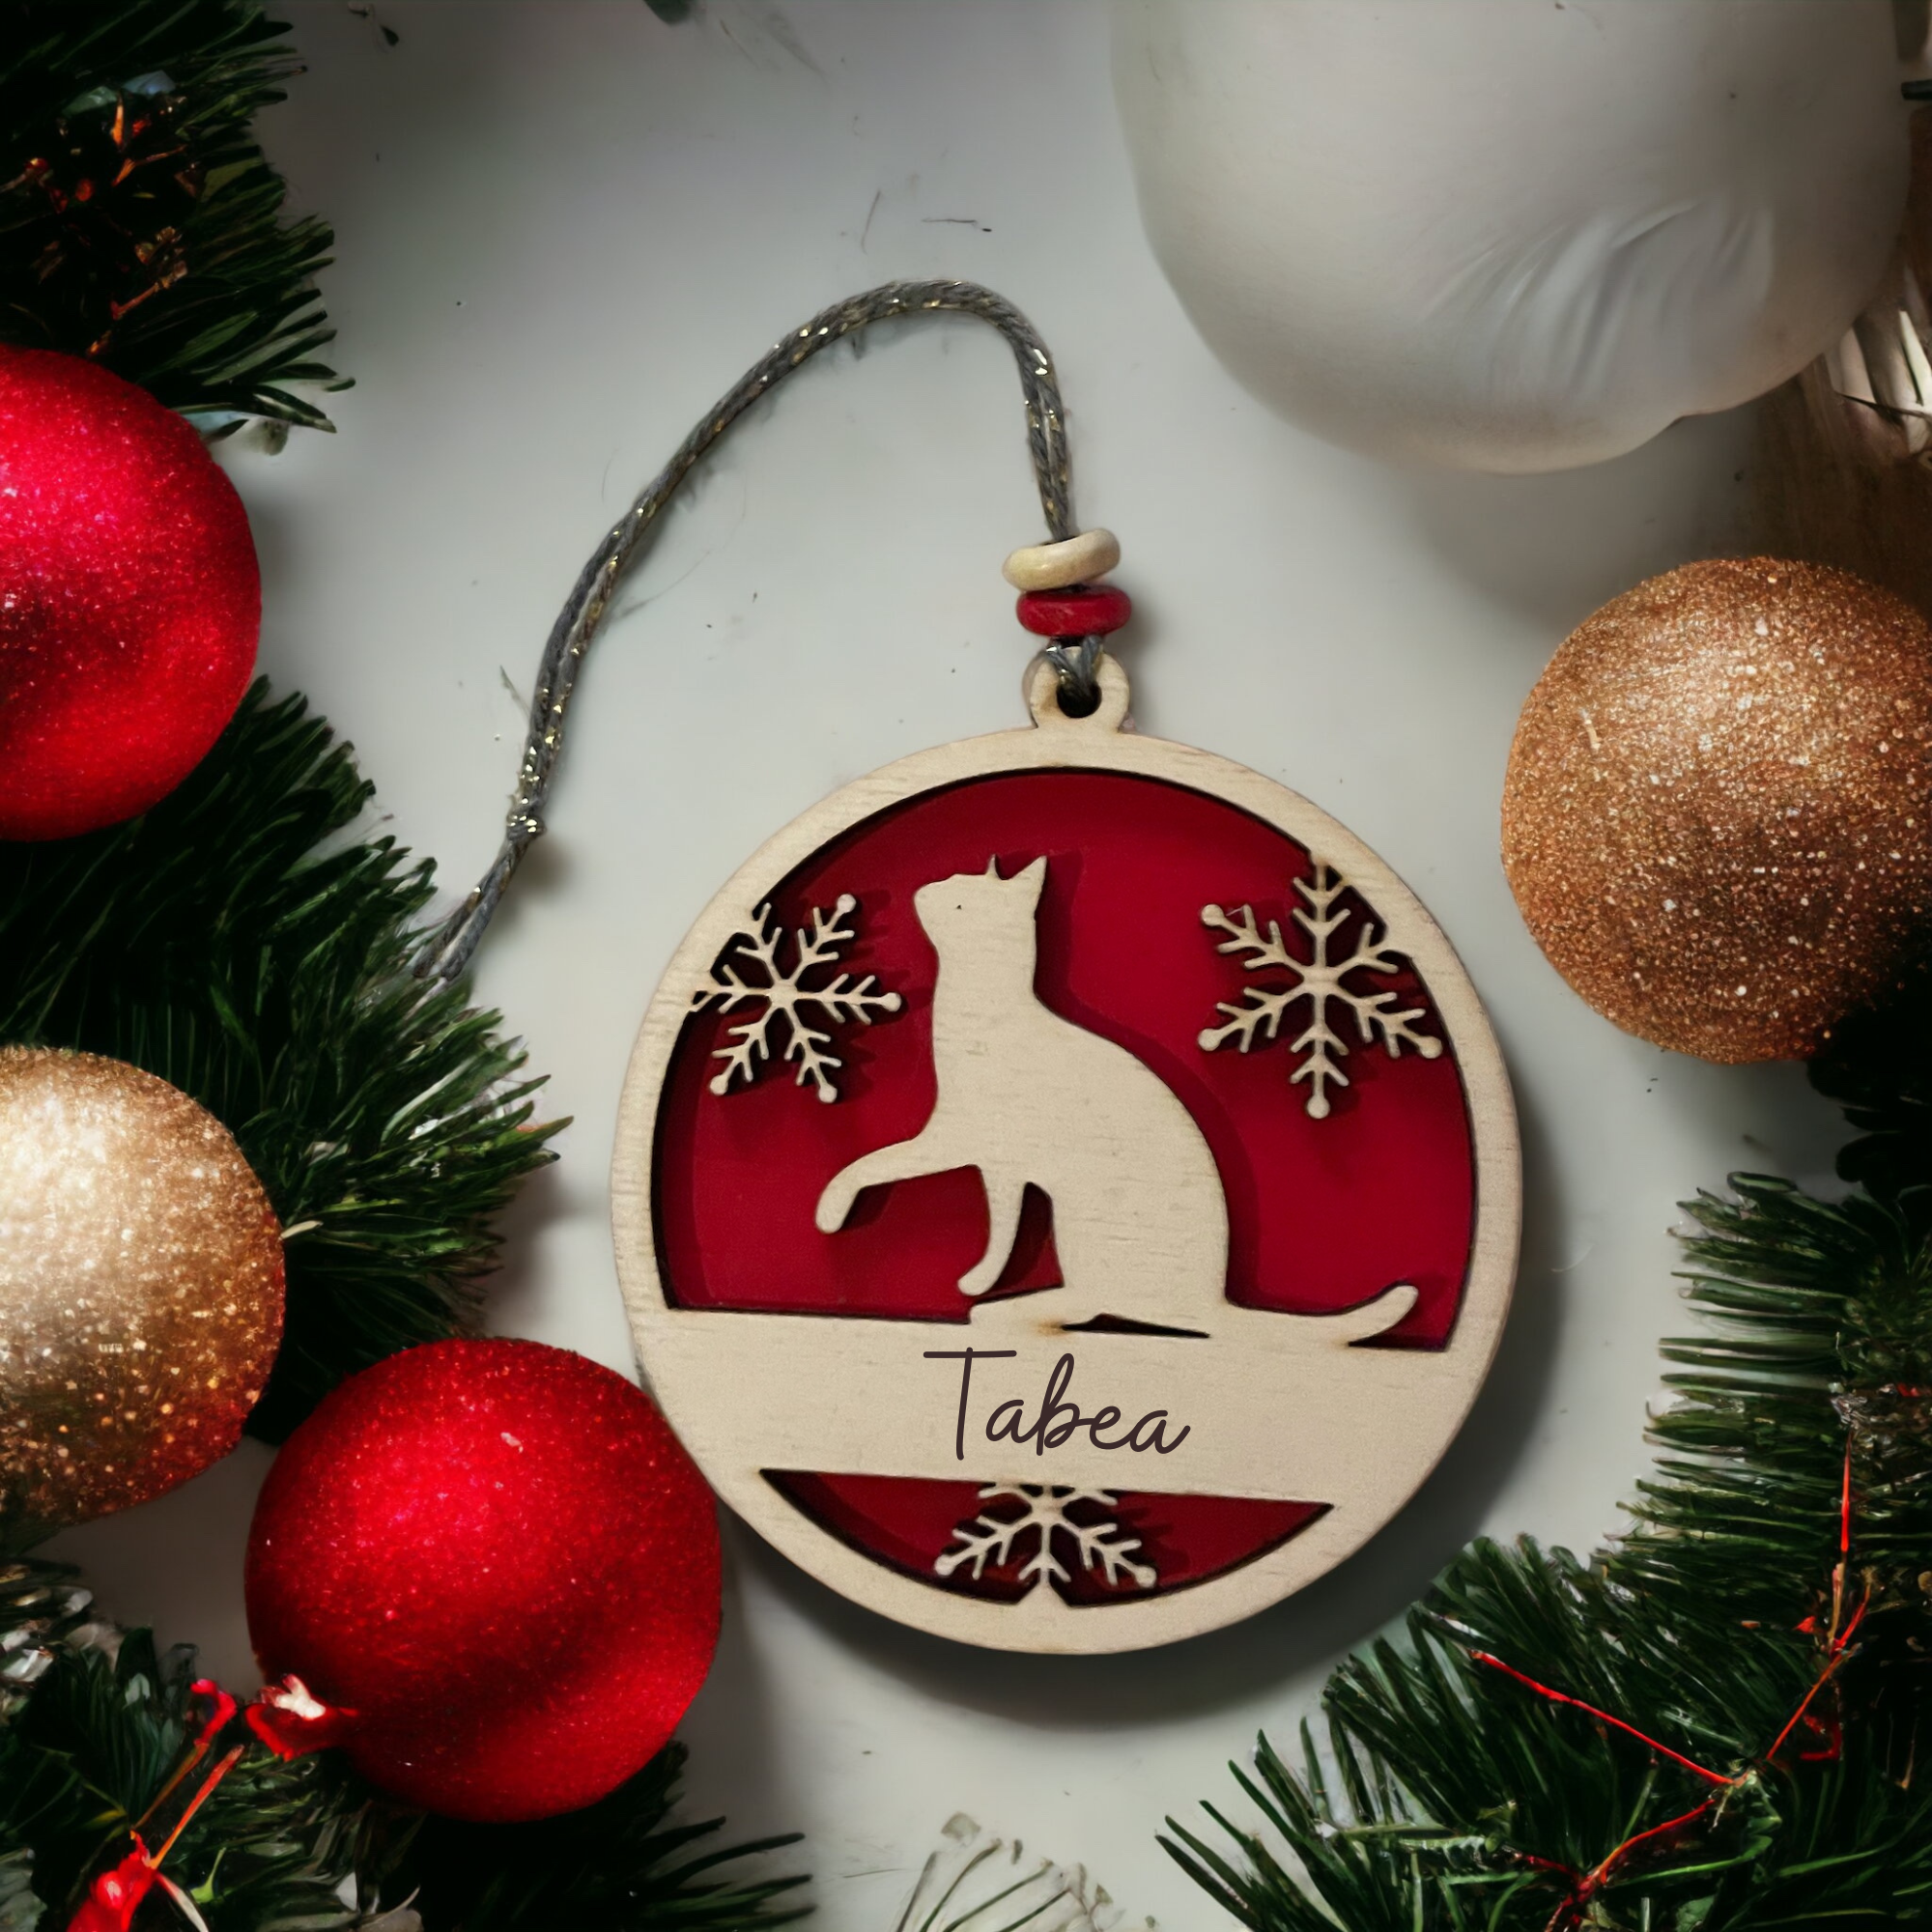 Personalized Wooden Cat Christmas Ornament - Customizable Pet Name